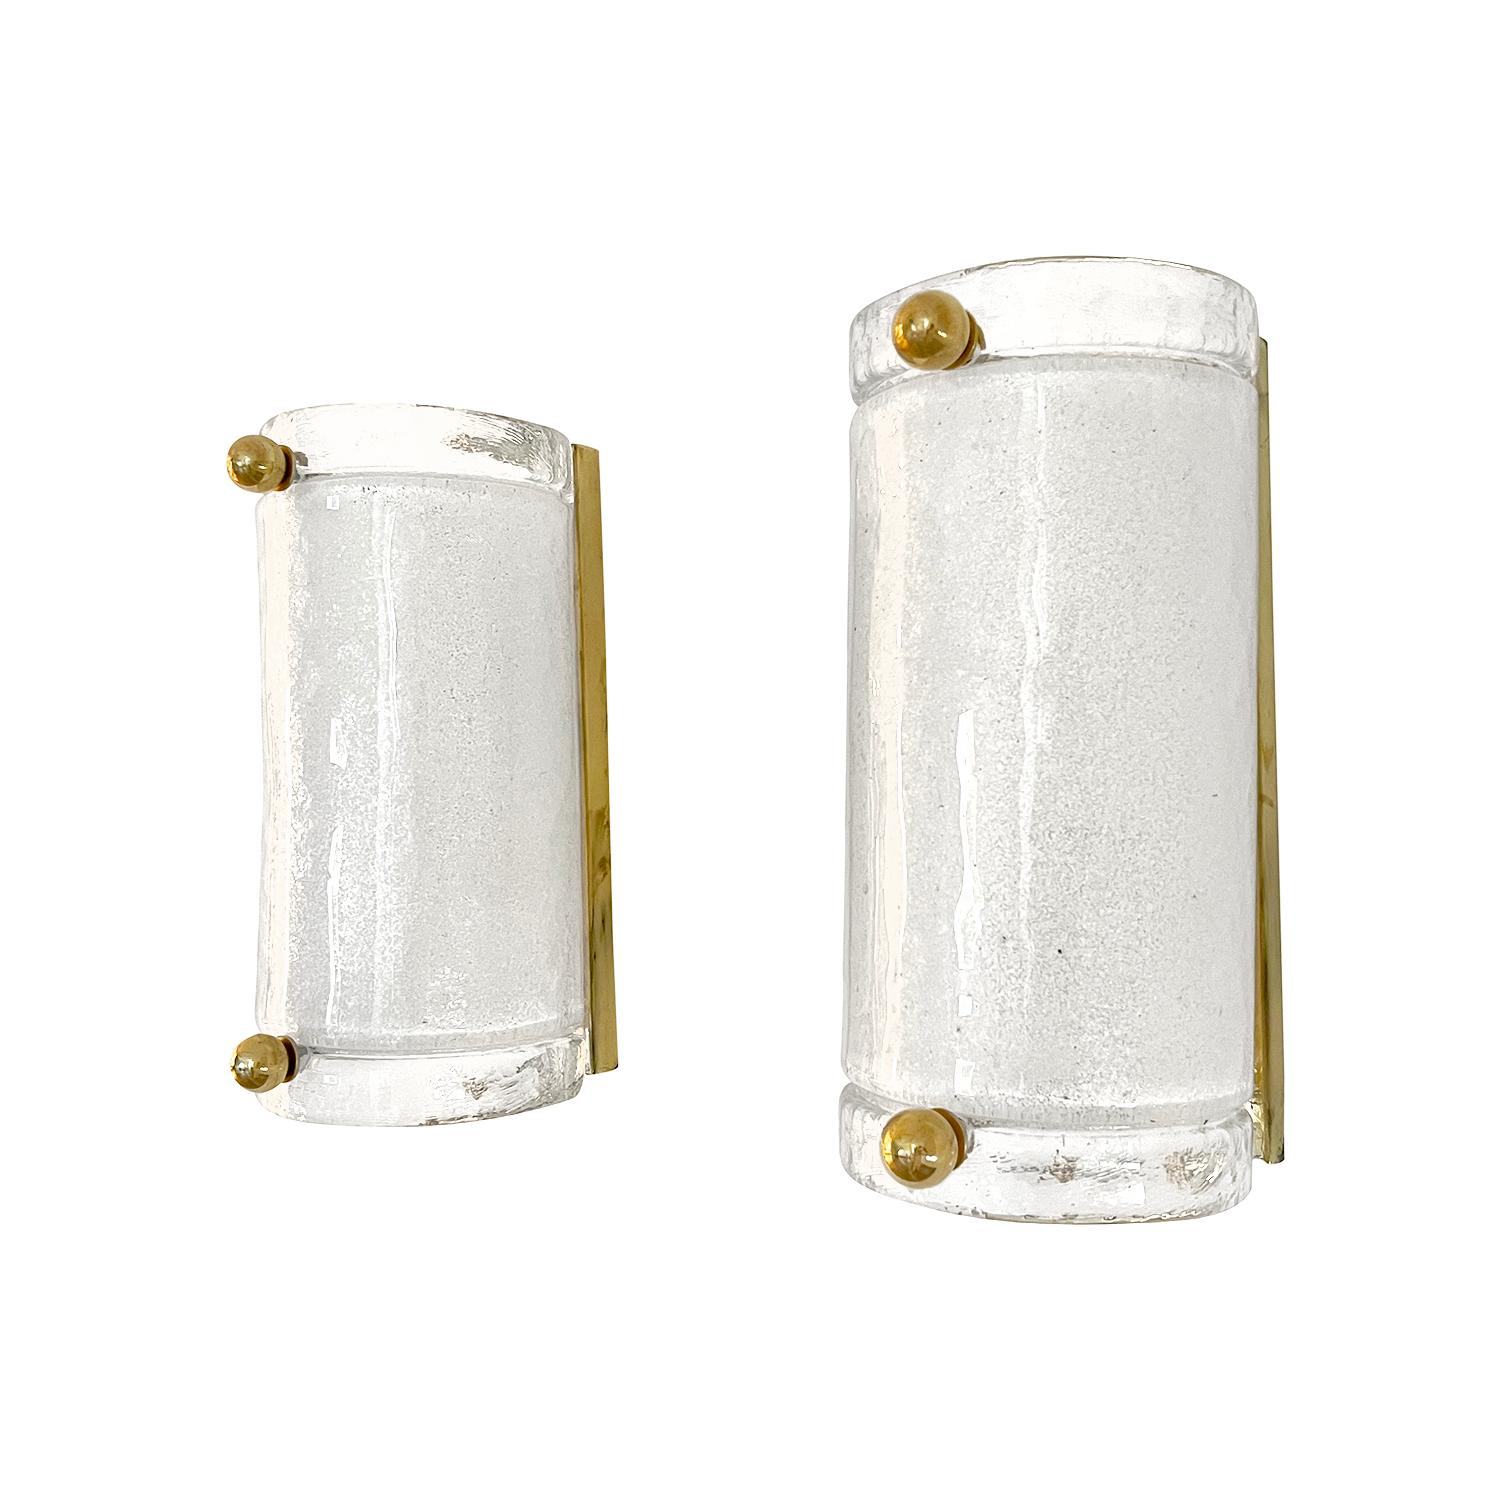 Hand-Crafted 20th Century Italian Pair of Small Murano Glass Sommerso Wall Sconces